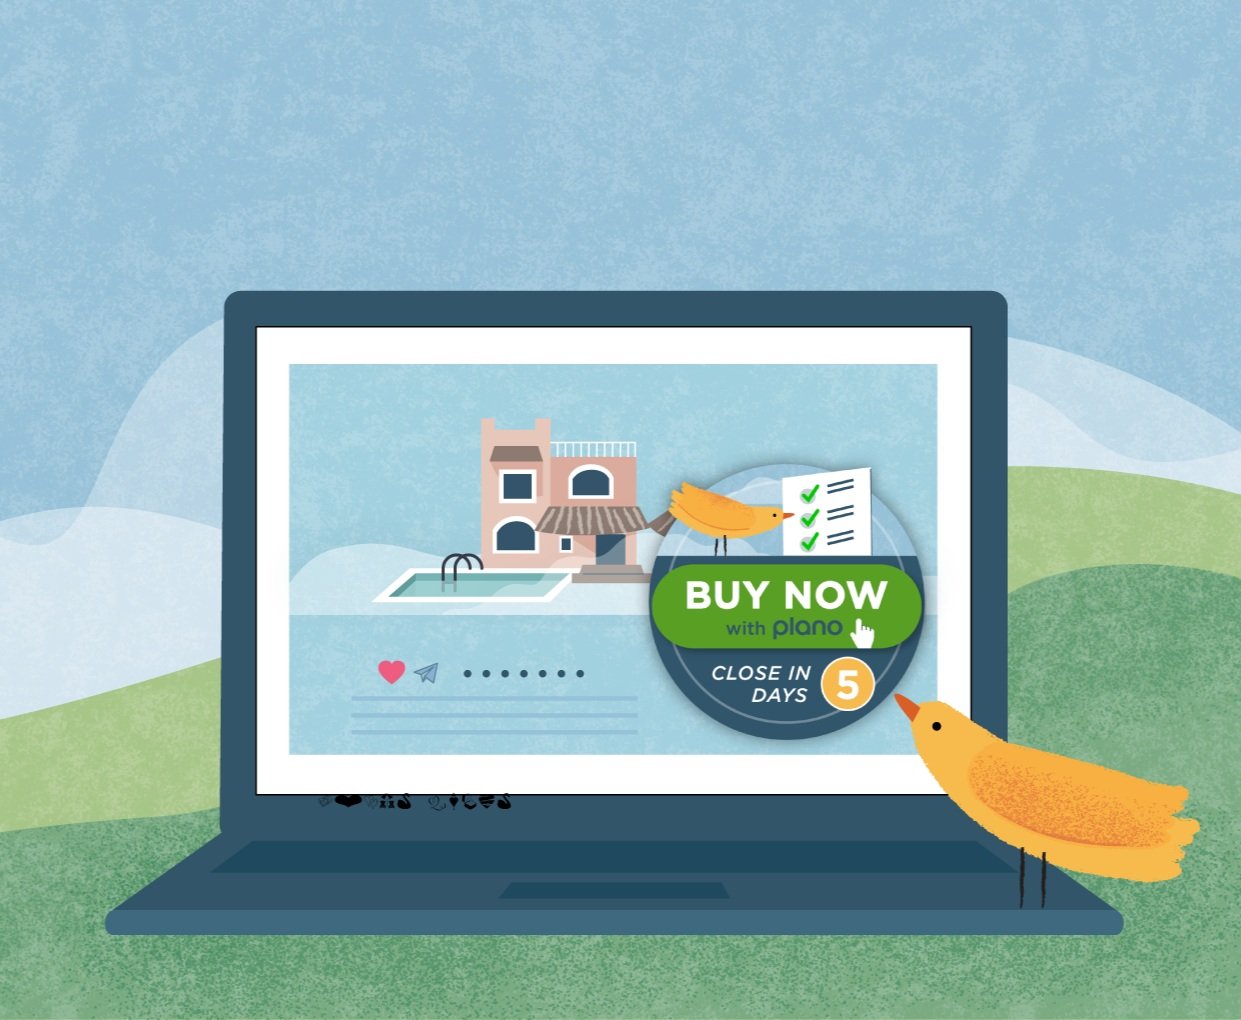 Plano - Buy, sell and tokenize homes easily online